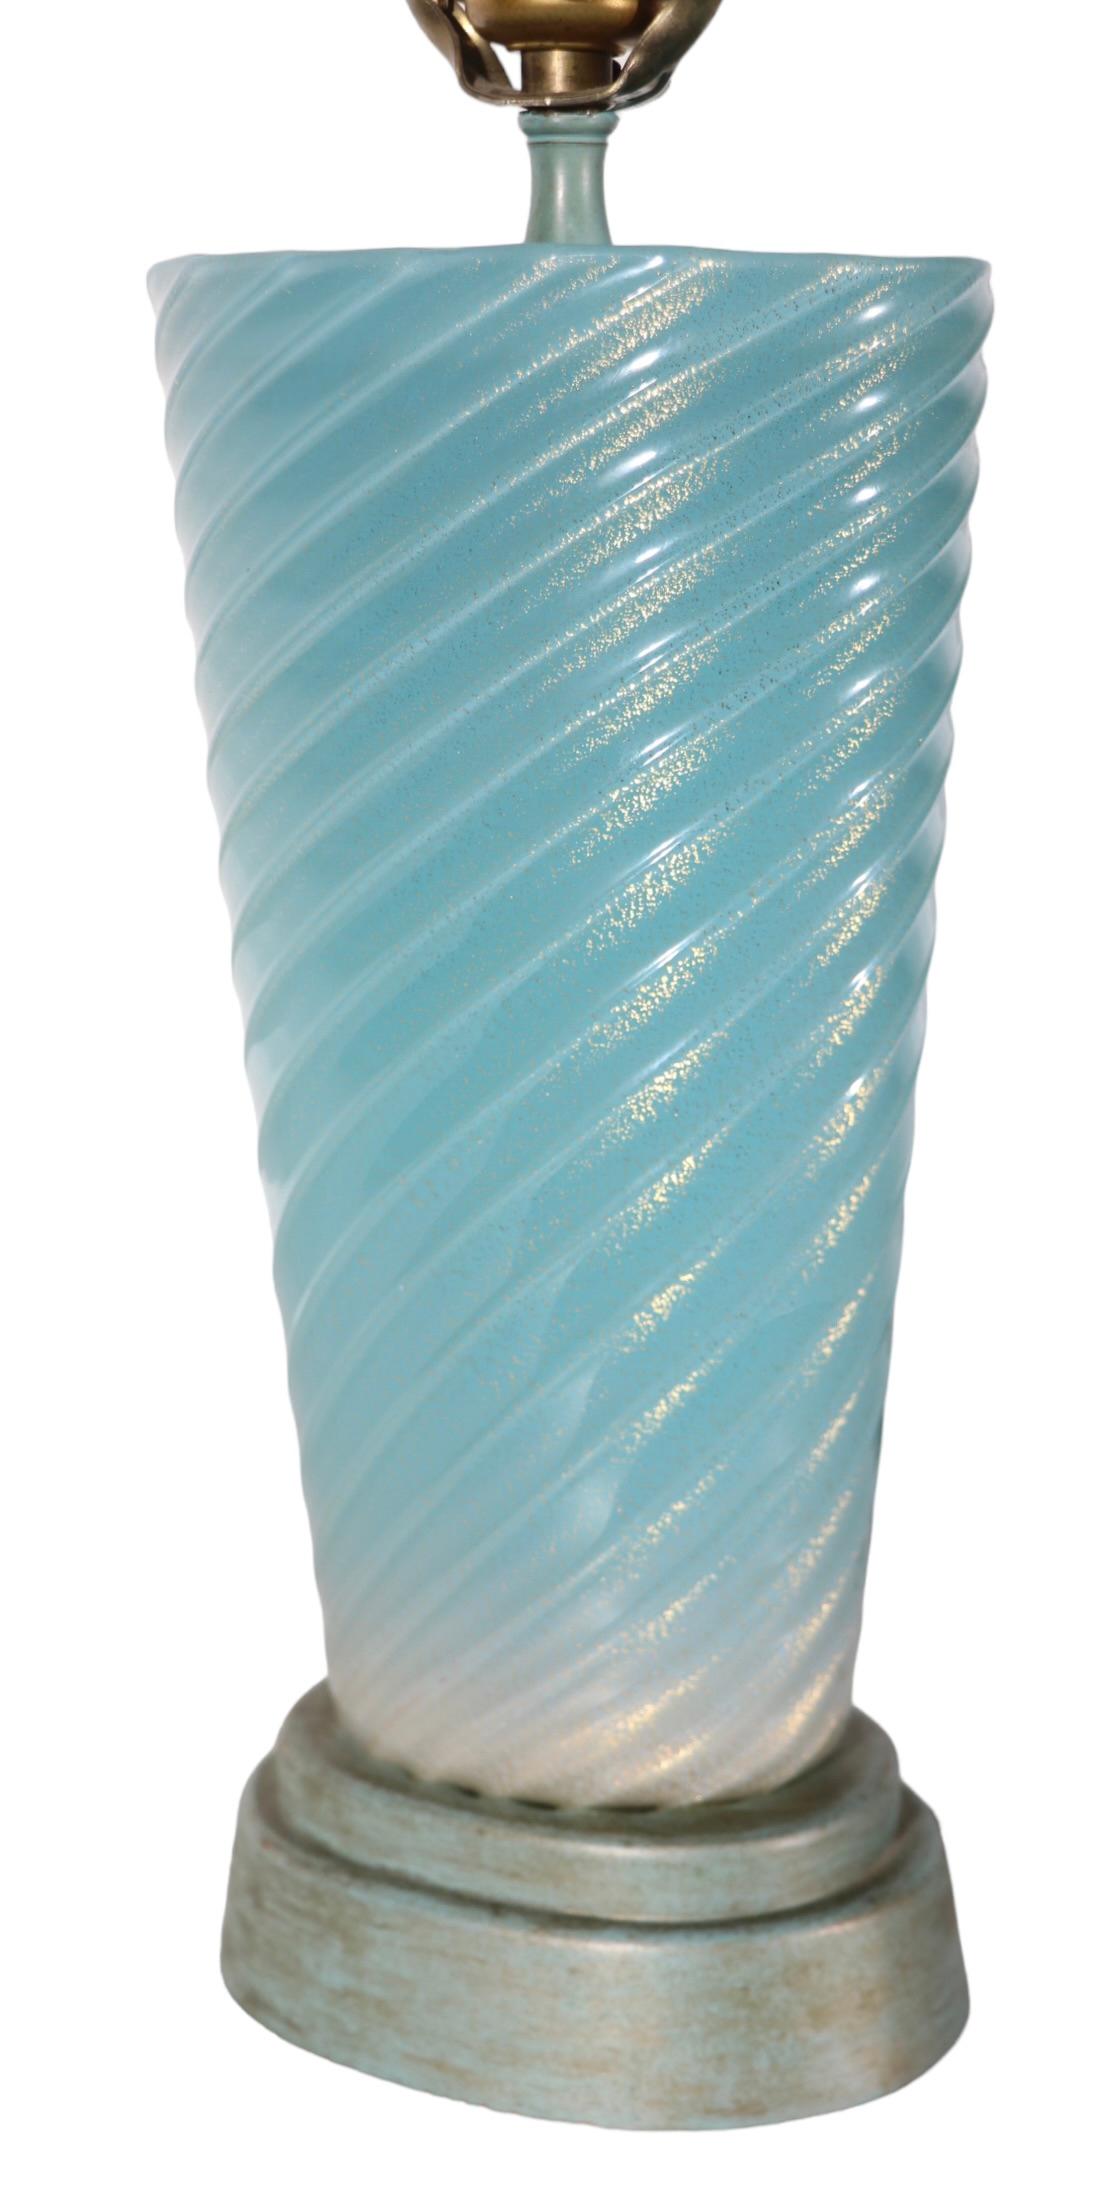 Murano Glass Lamp Blue Swirl with Gold Inclusion possibly Fratelli Toso, Seguso  For Sale 7